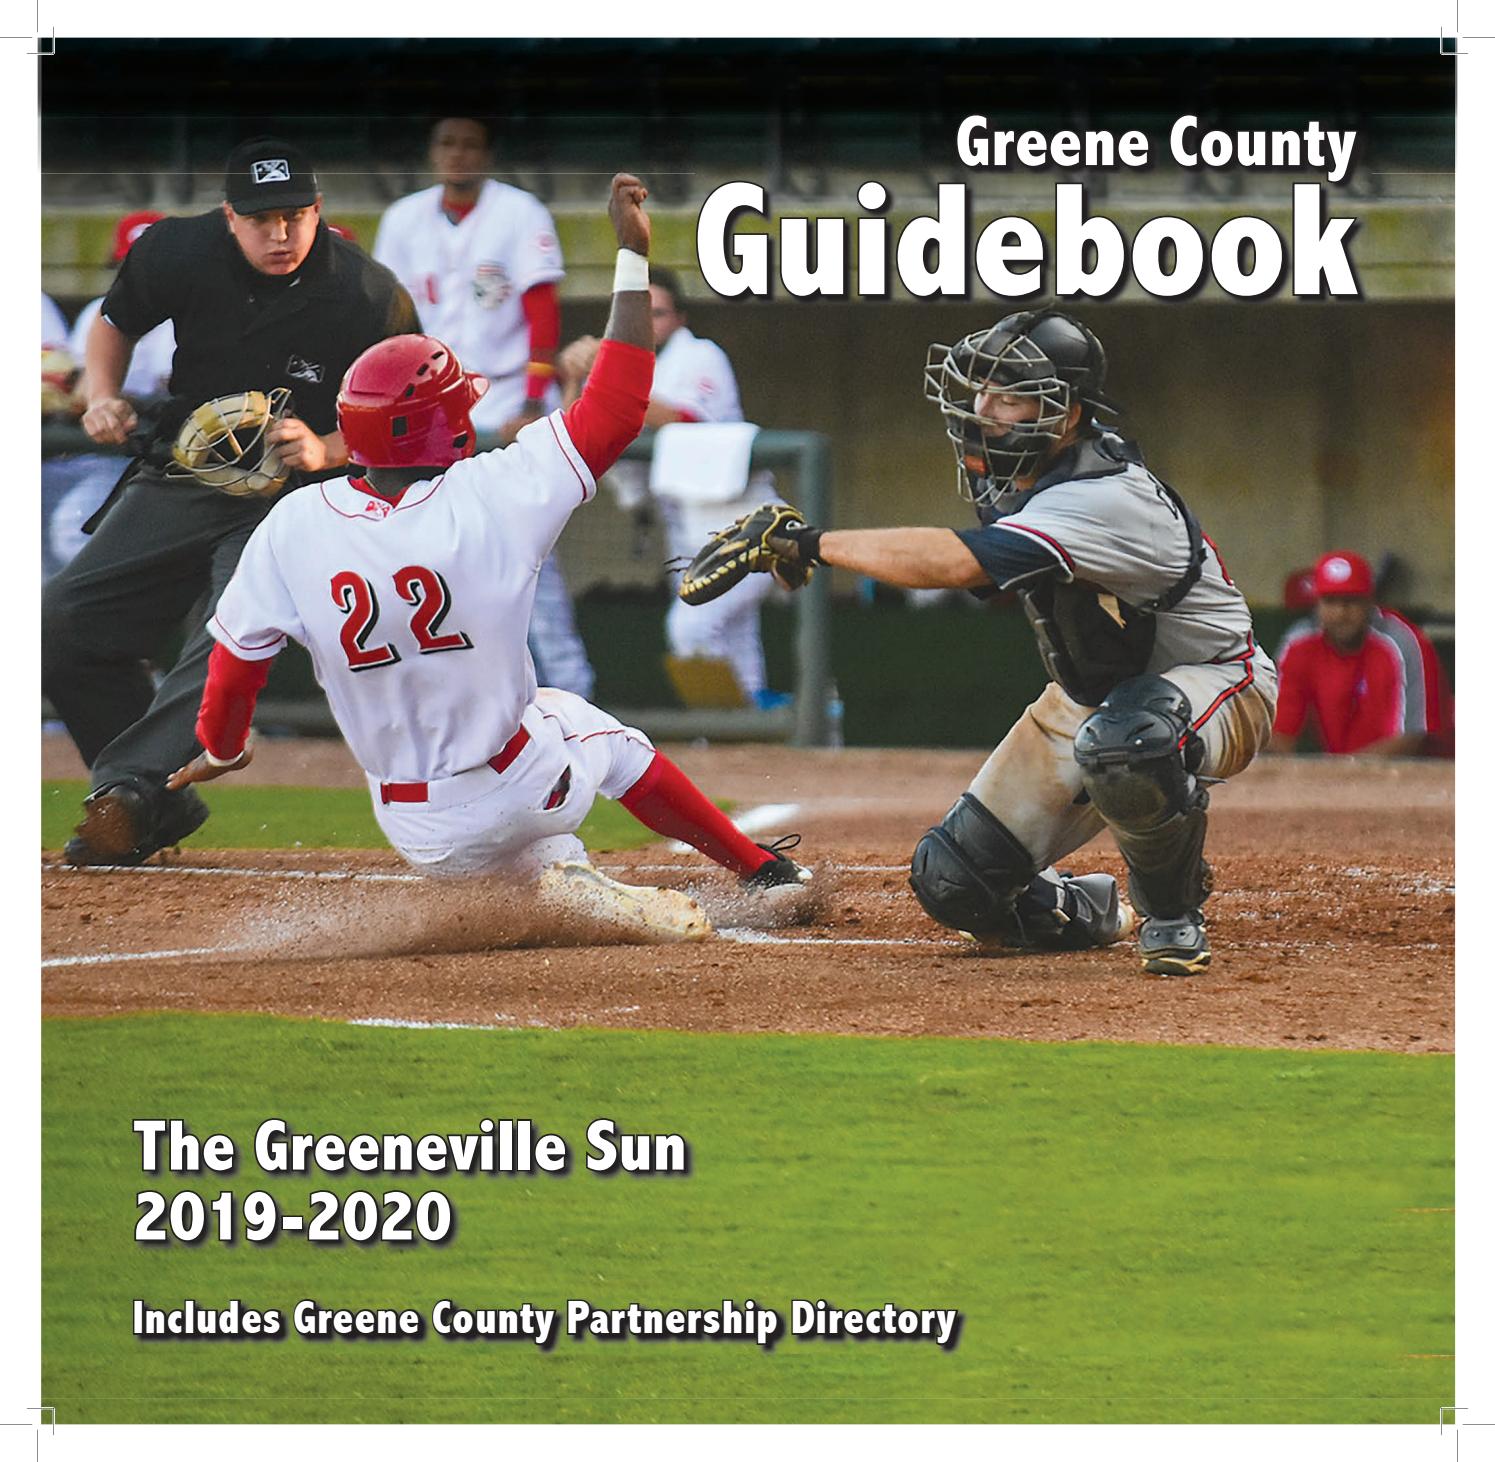 Badcock Fireplace Fresh Guidebook 2019 2020 by the Greeneville Sun issuu